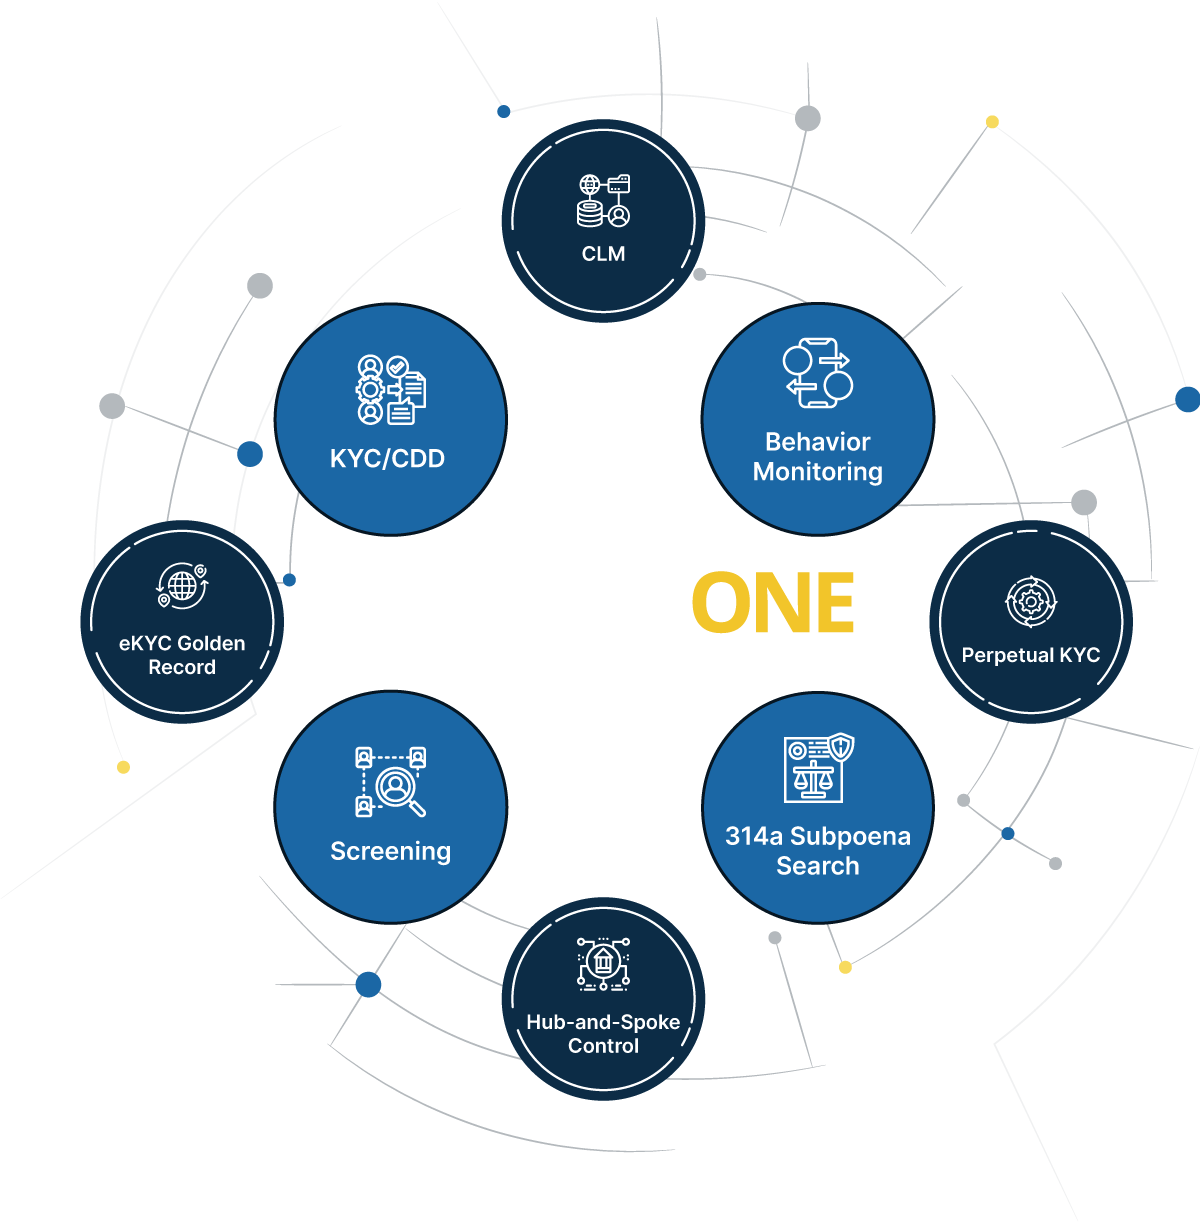 This hero-style illustration shows the networked nature of AML software on the RegTechONE platform. The art shows the AML software modules for KYC CDD, transaction monitoring, sanctions screening, and other uses for this AML software designed by the firm AML Partners.